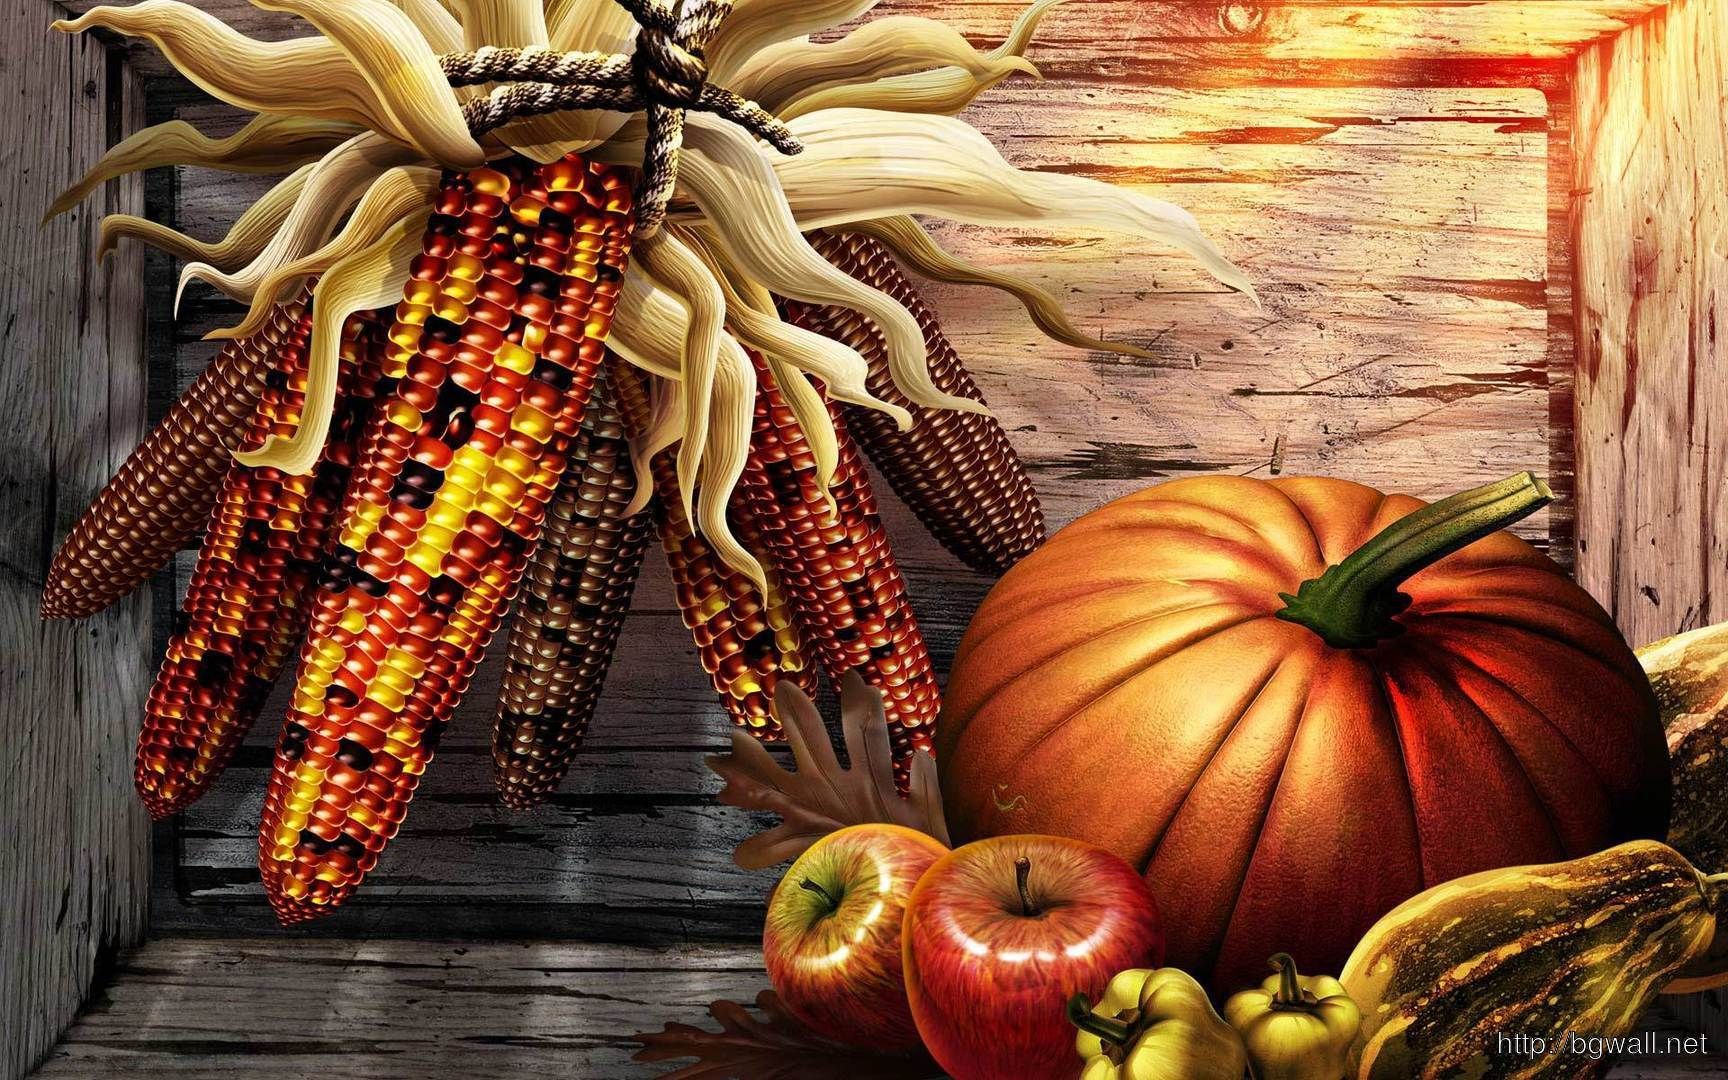 Free Thanksgiving Background Wallpaper For Desktop. Thanksgiving wallpaper, Thanksgiving photo, Happy thanksgiving wallpaper